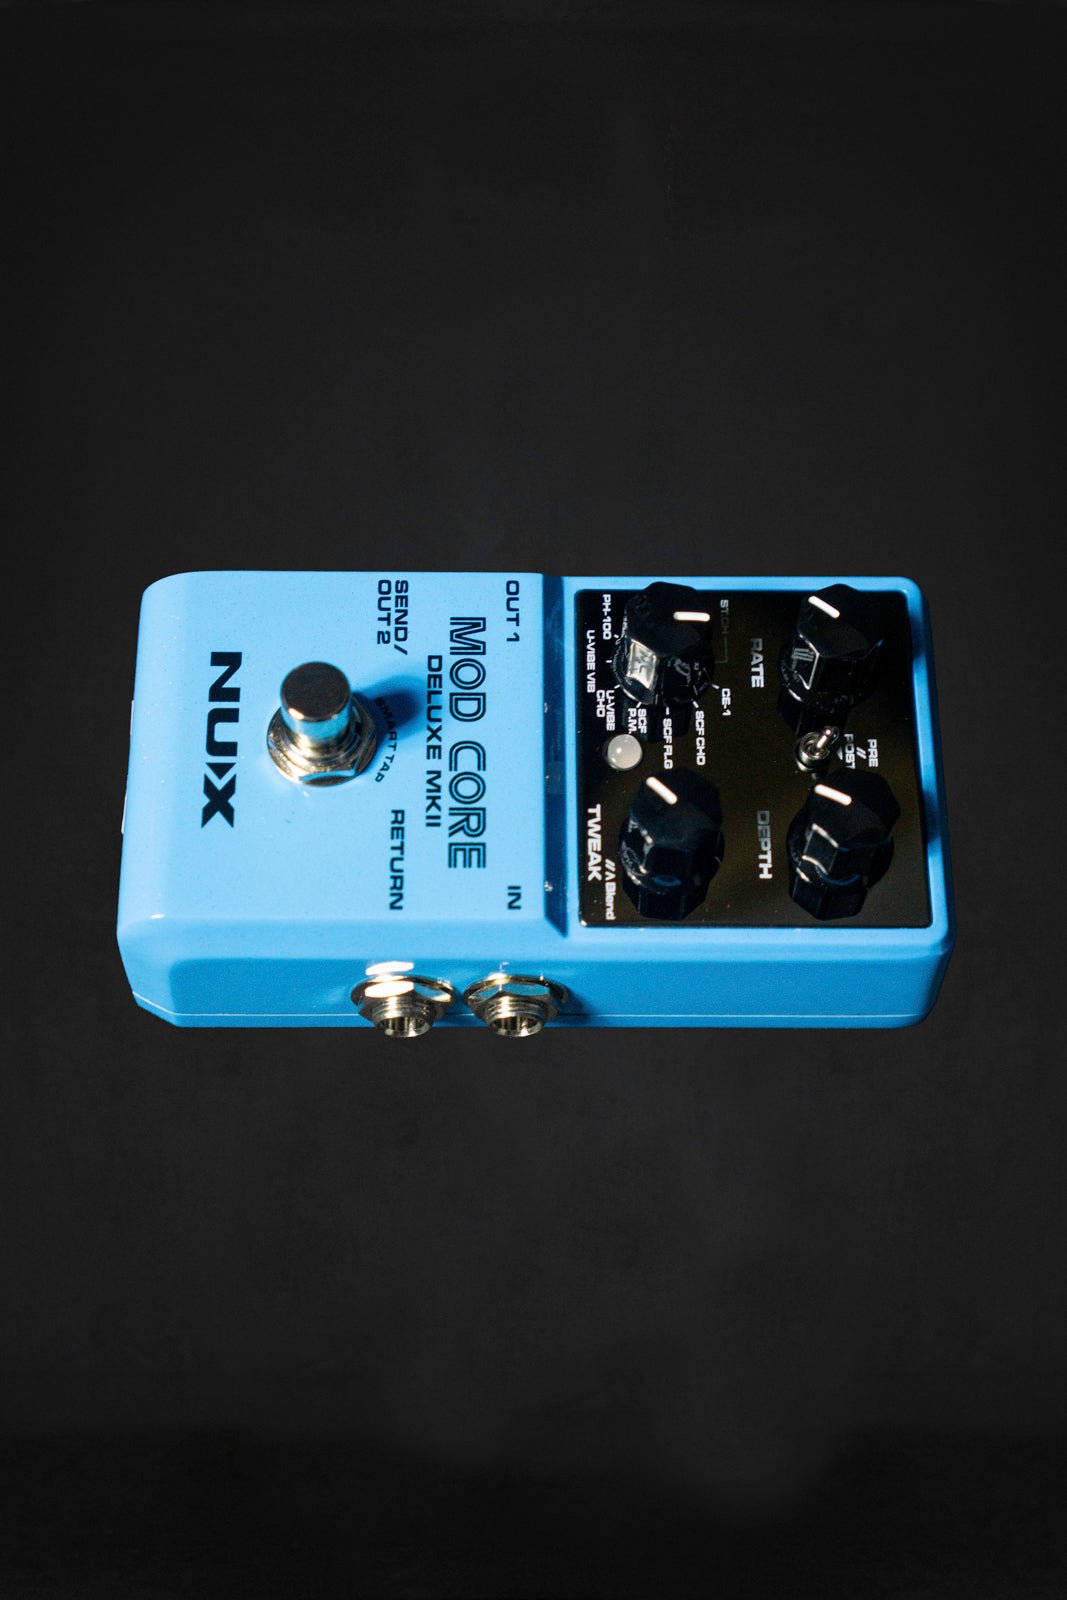 NU-X Mod Core Deluxe Mk.2 Modulation Pedal - Effects Pedals - NU-X